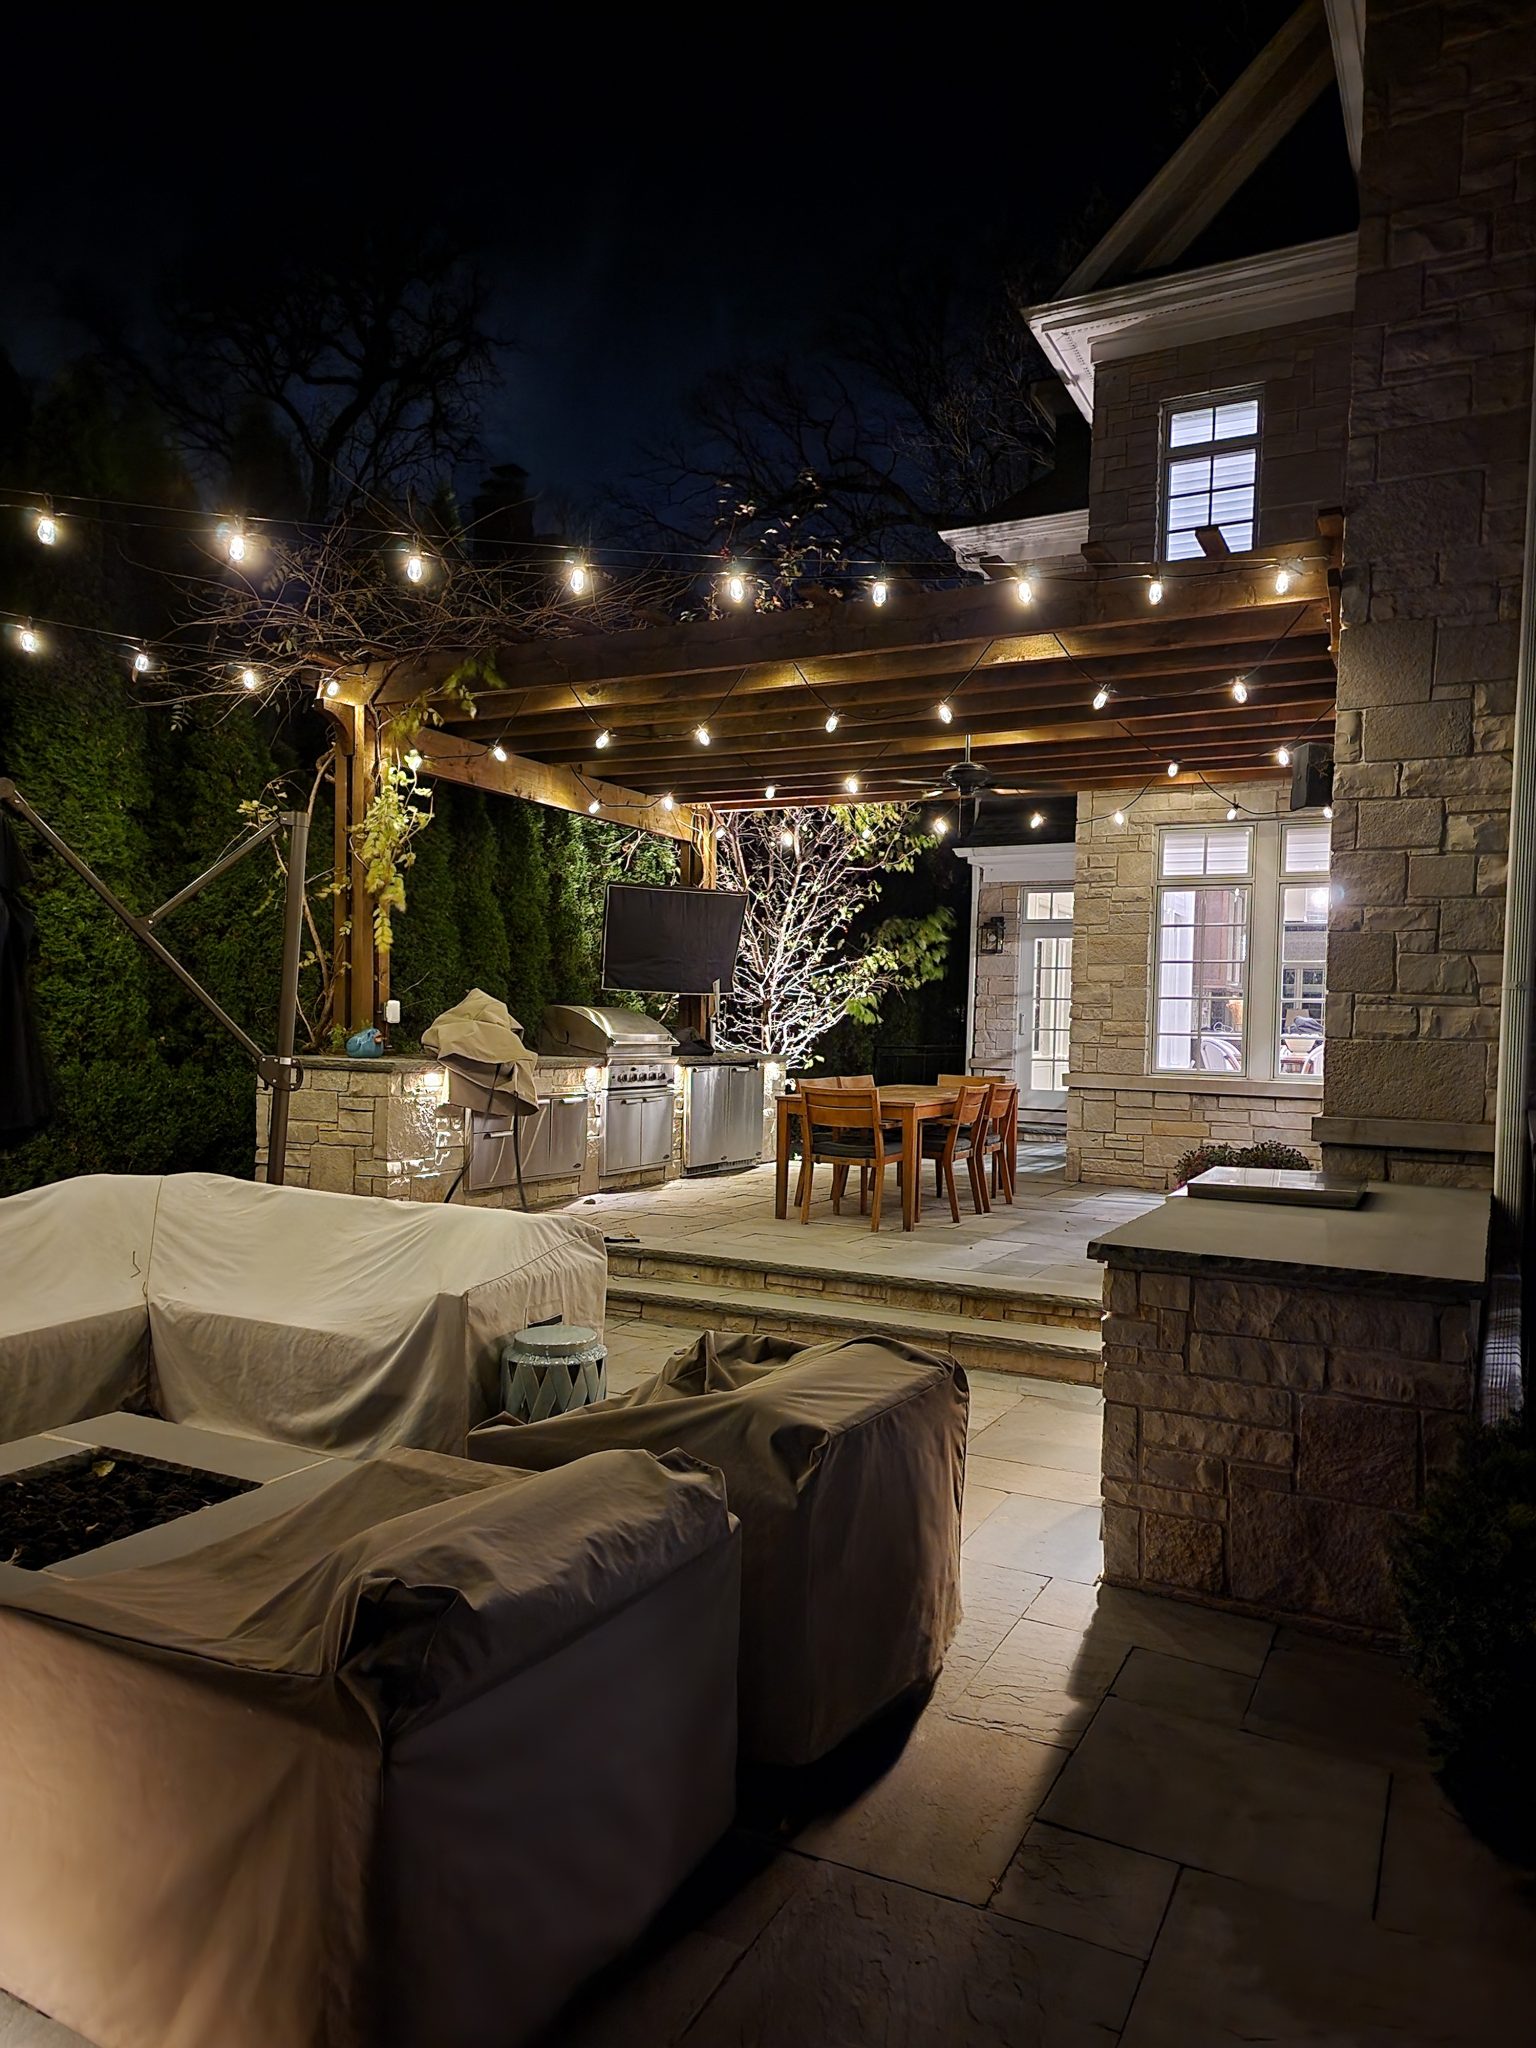 10 reasons to light your outdoor kitchen, lighting outdoor kitchen, outdoor lighting company in kenosha